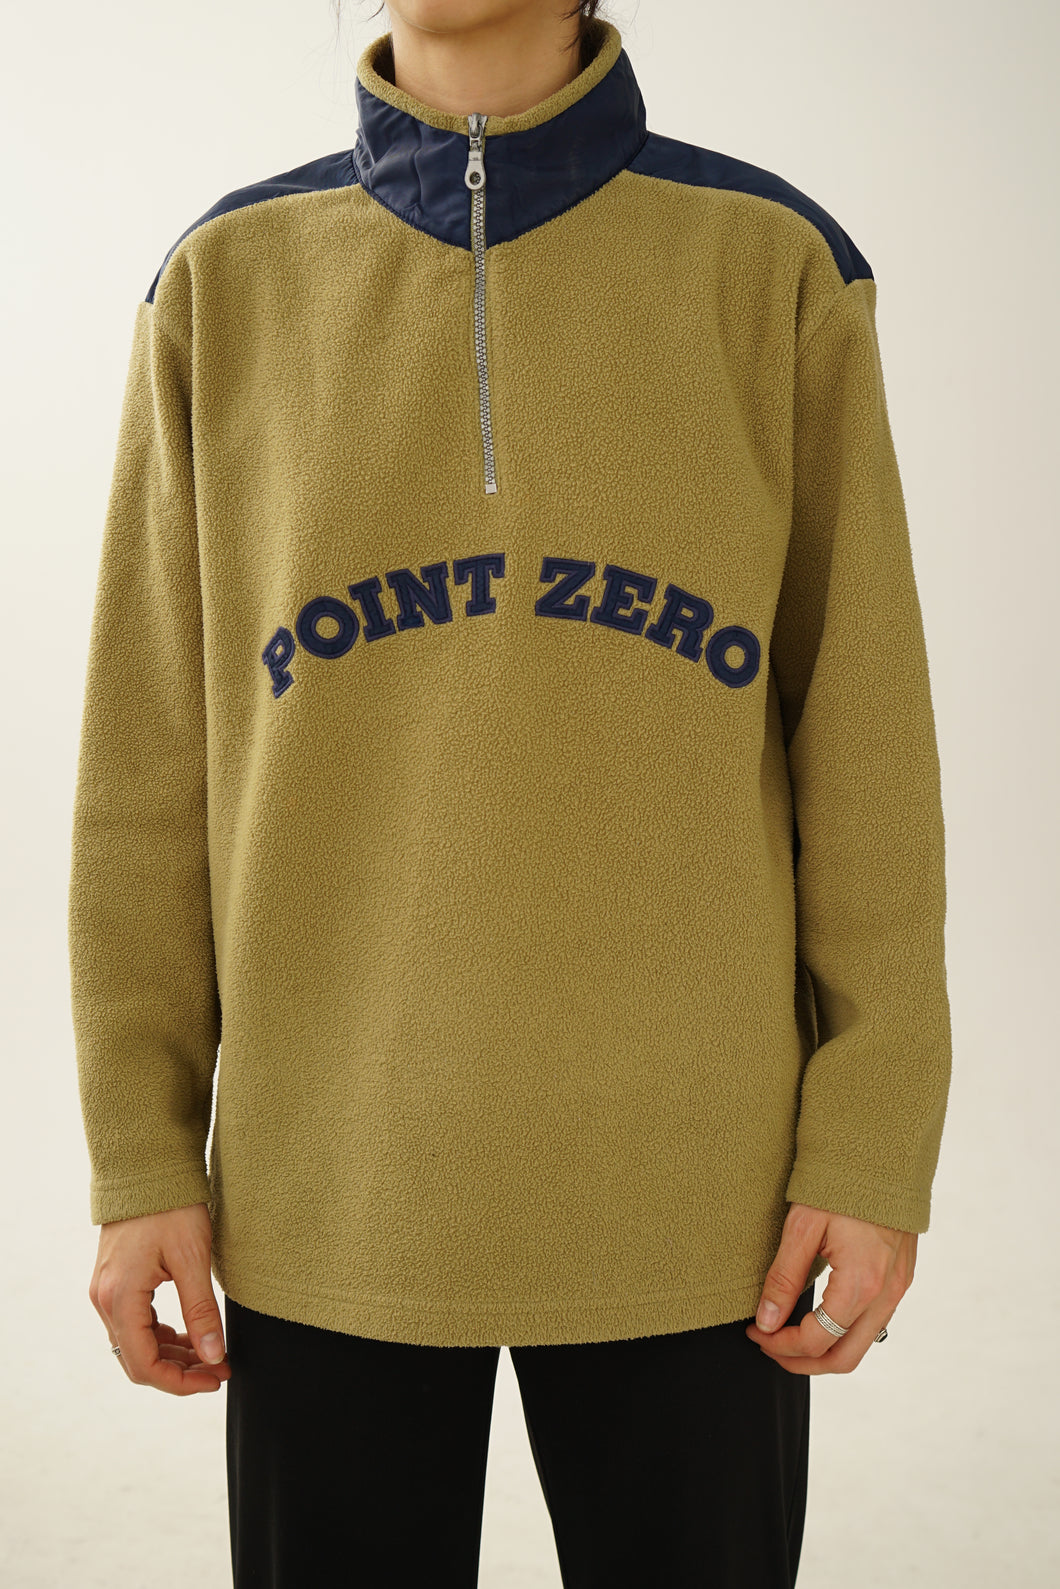 Vintage Point Zéro green and blue fleece S-M